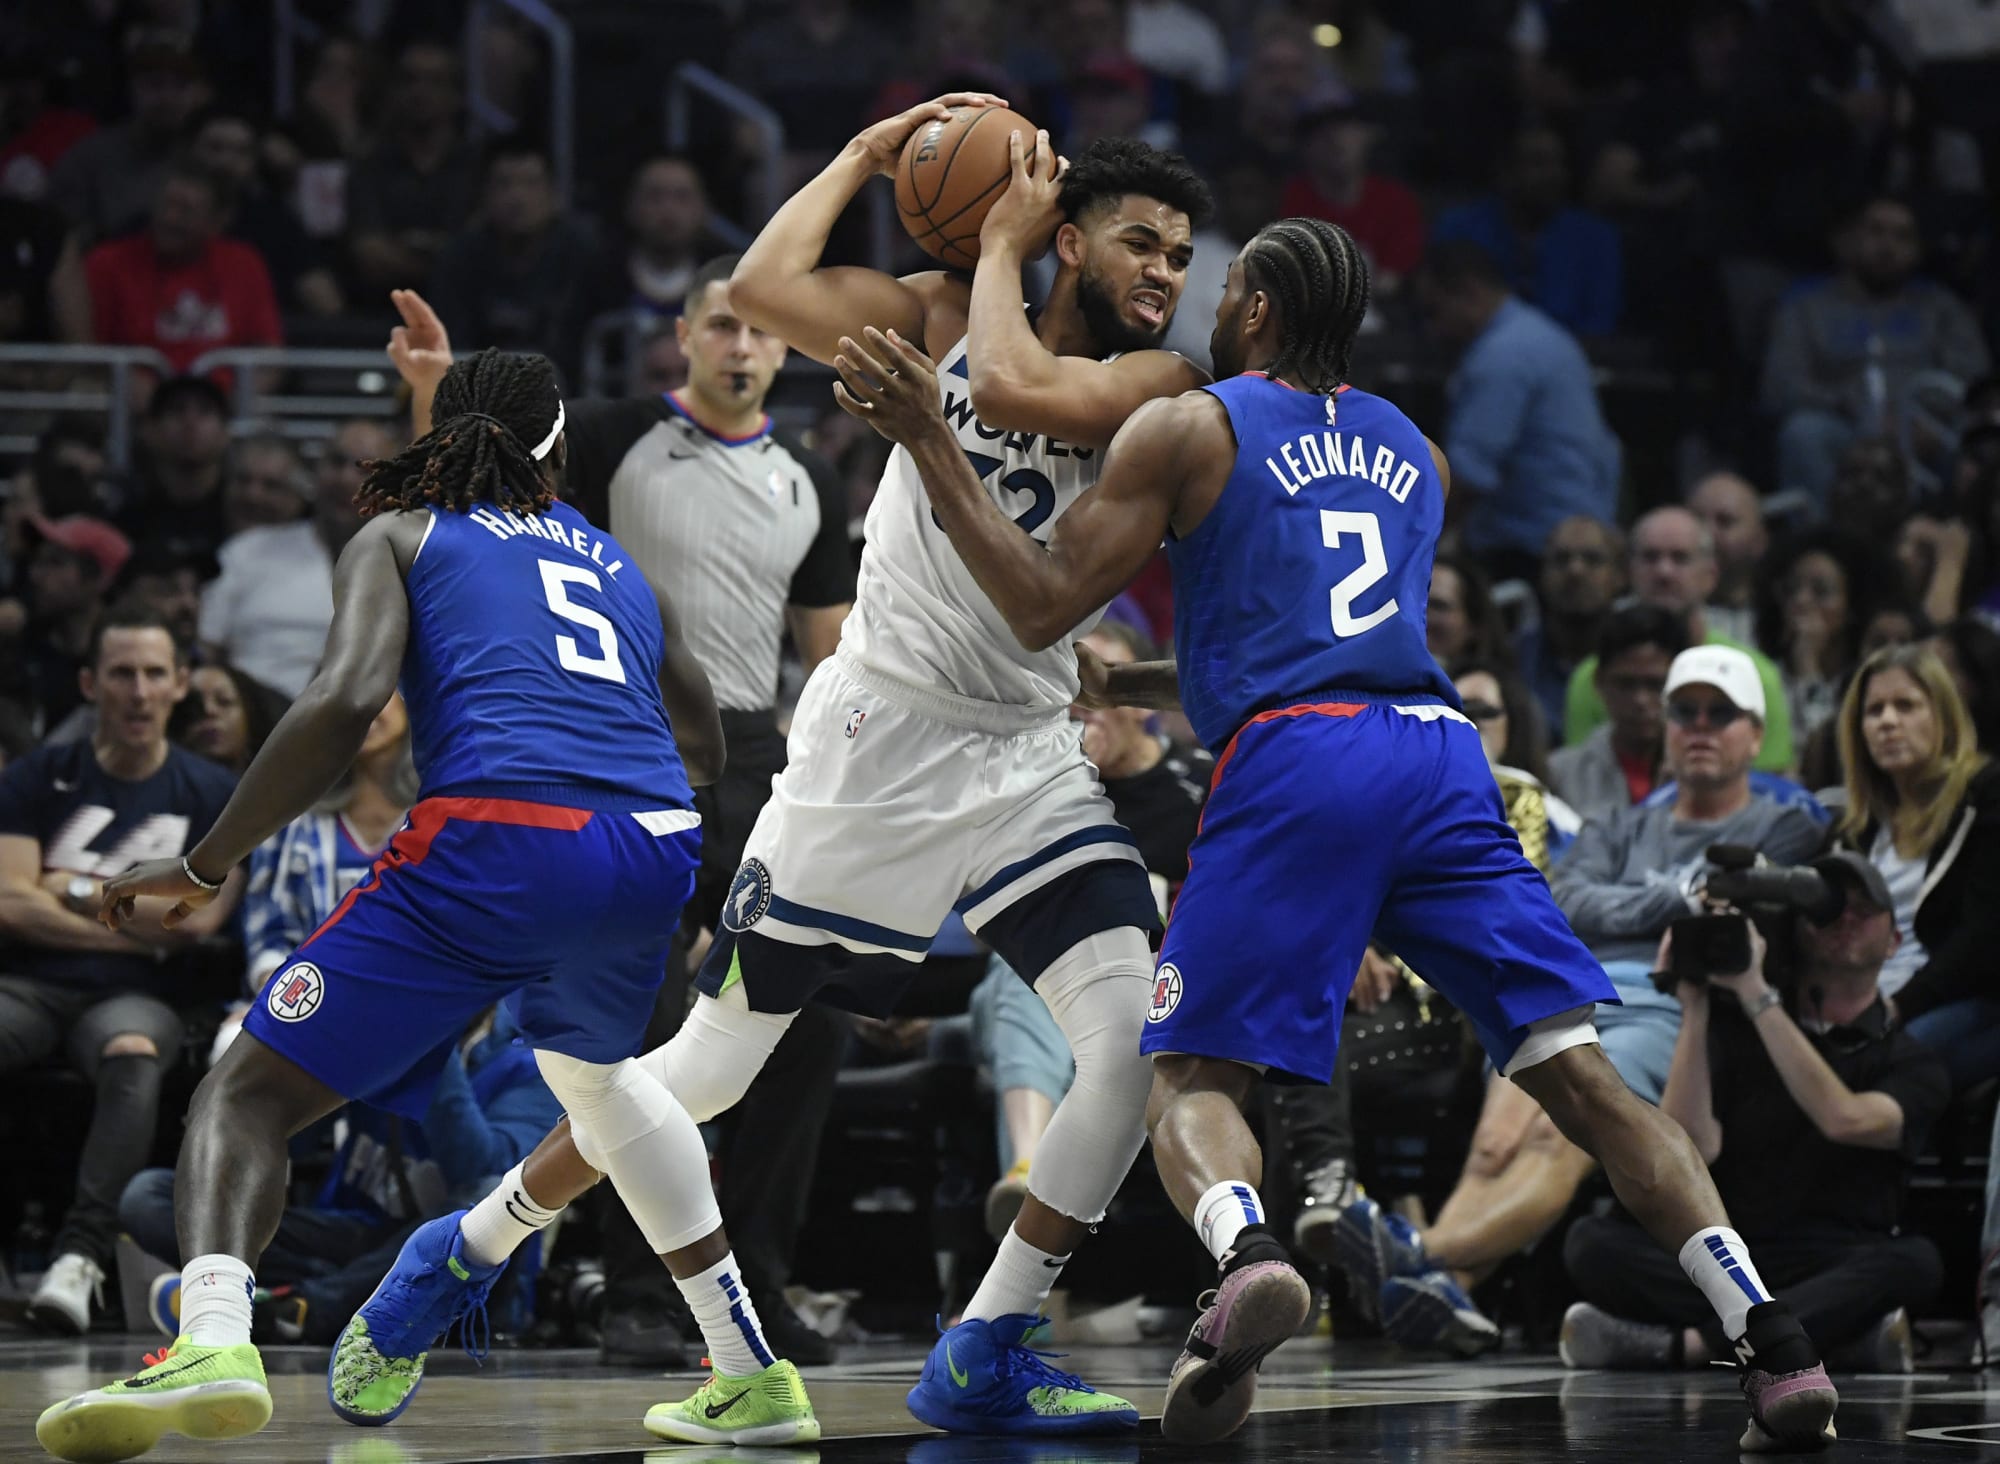 Minnesota Timberwolves vs. Clippers Odds, injuries and what to watch for